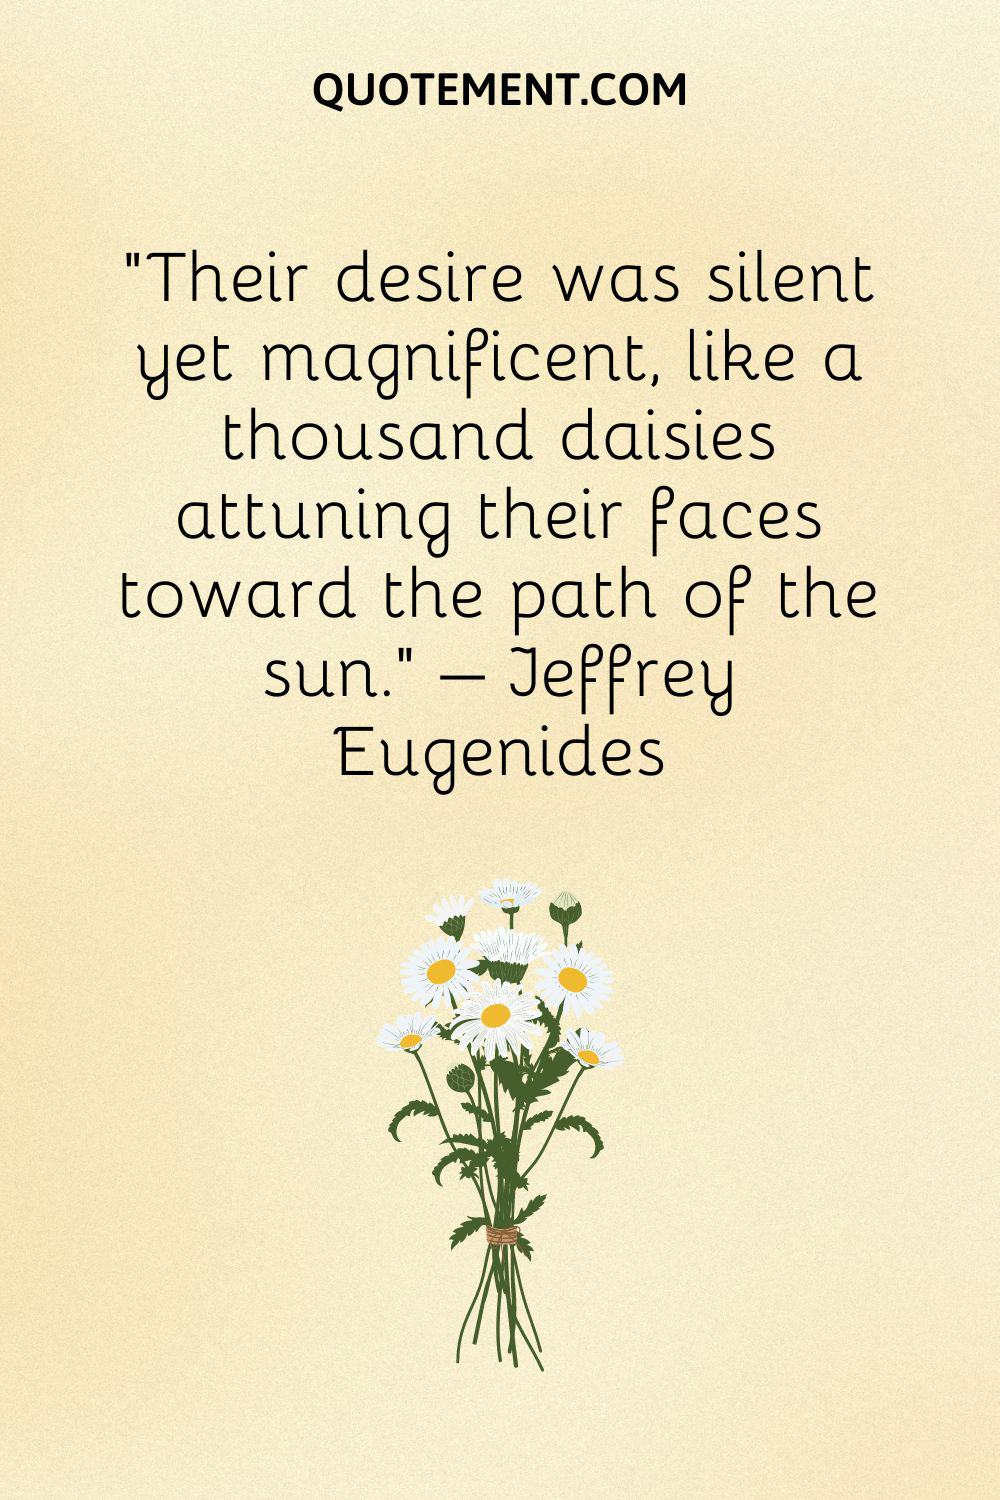 “Their desire was silent yet magnificent, like a thousand daisies attuning their faces toward the path of the sun.” – Jeffrey Eugenides